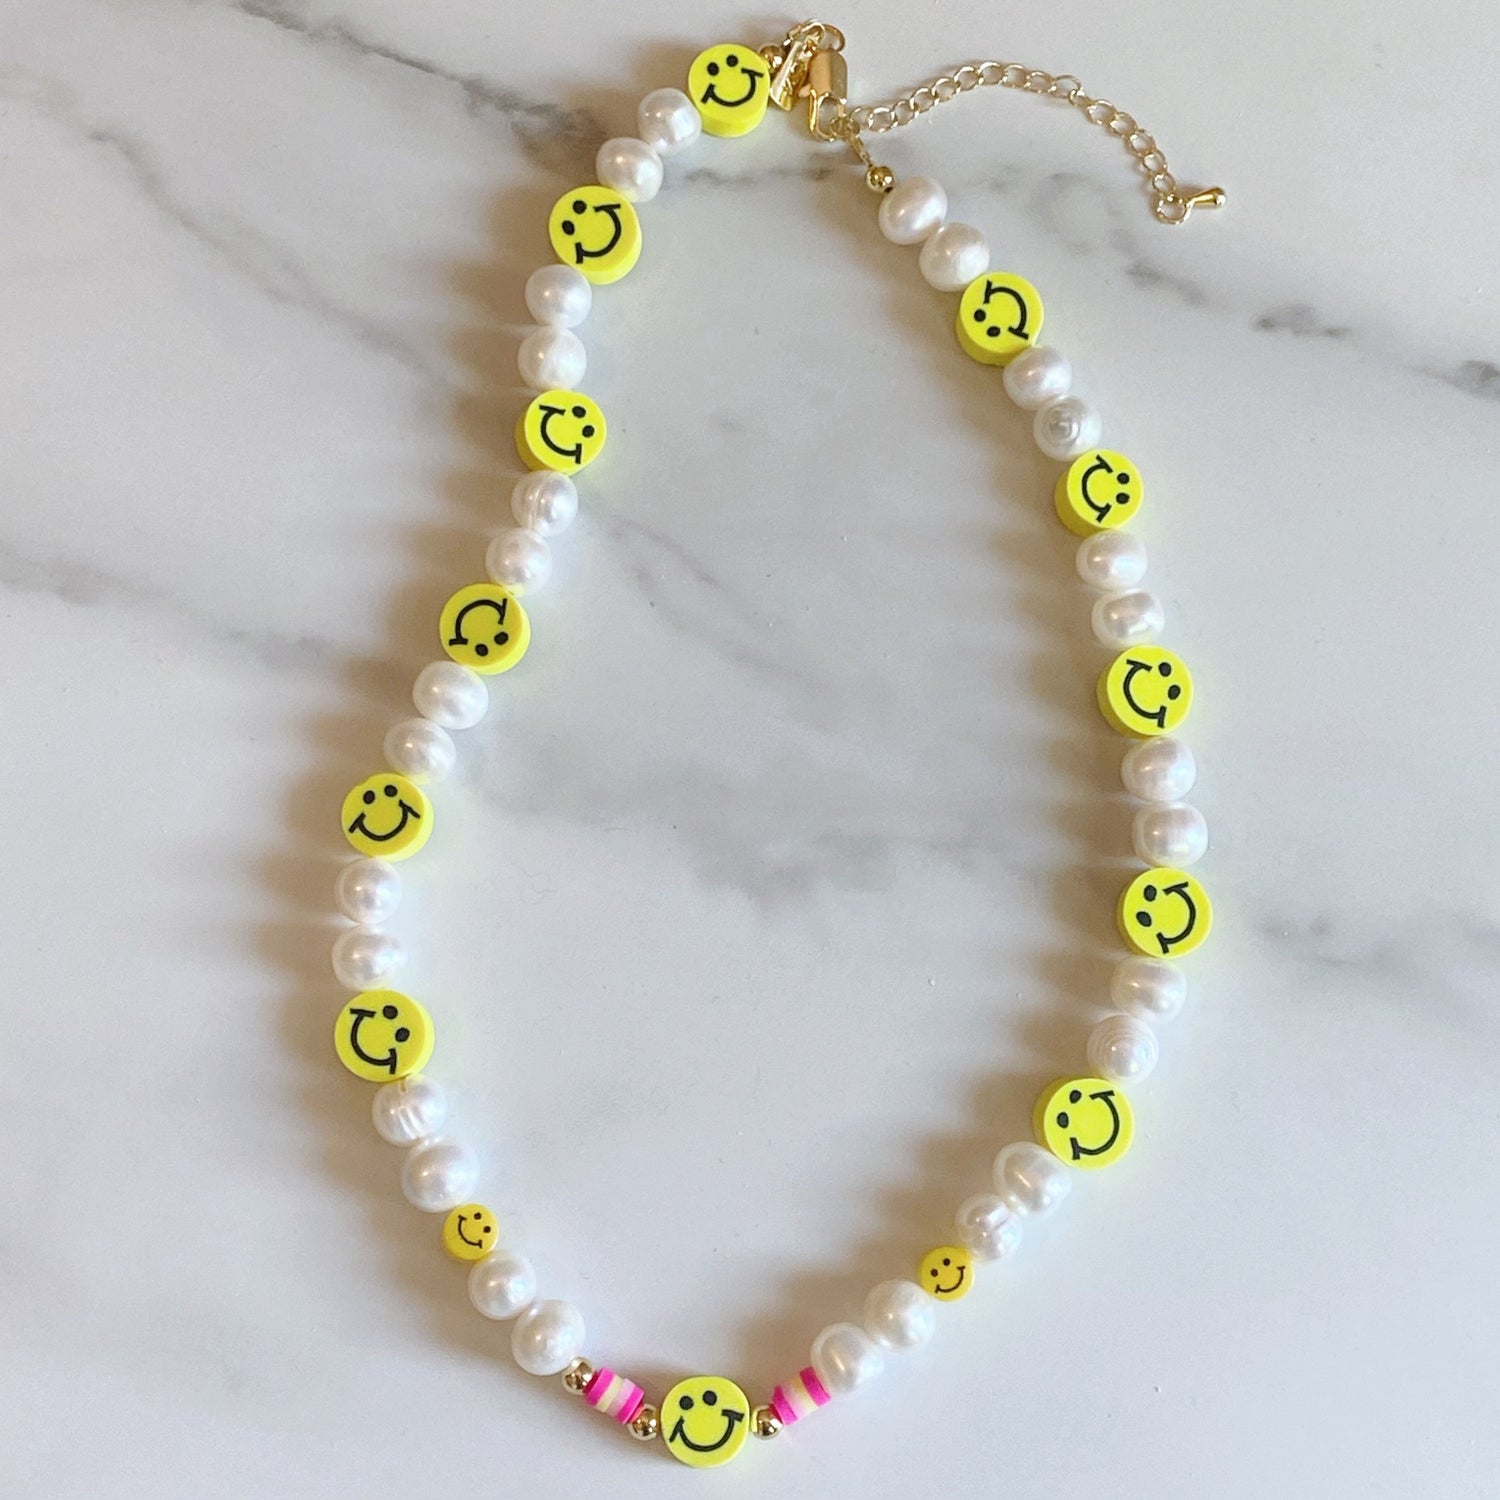 Rainbow Beads Smiley Face Necklace